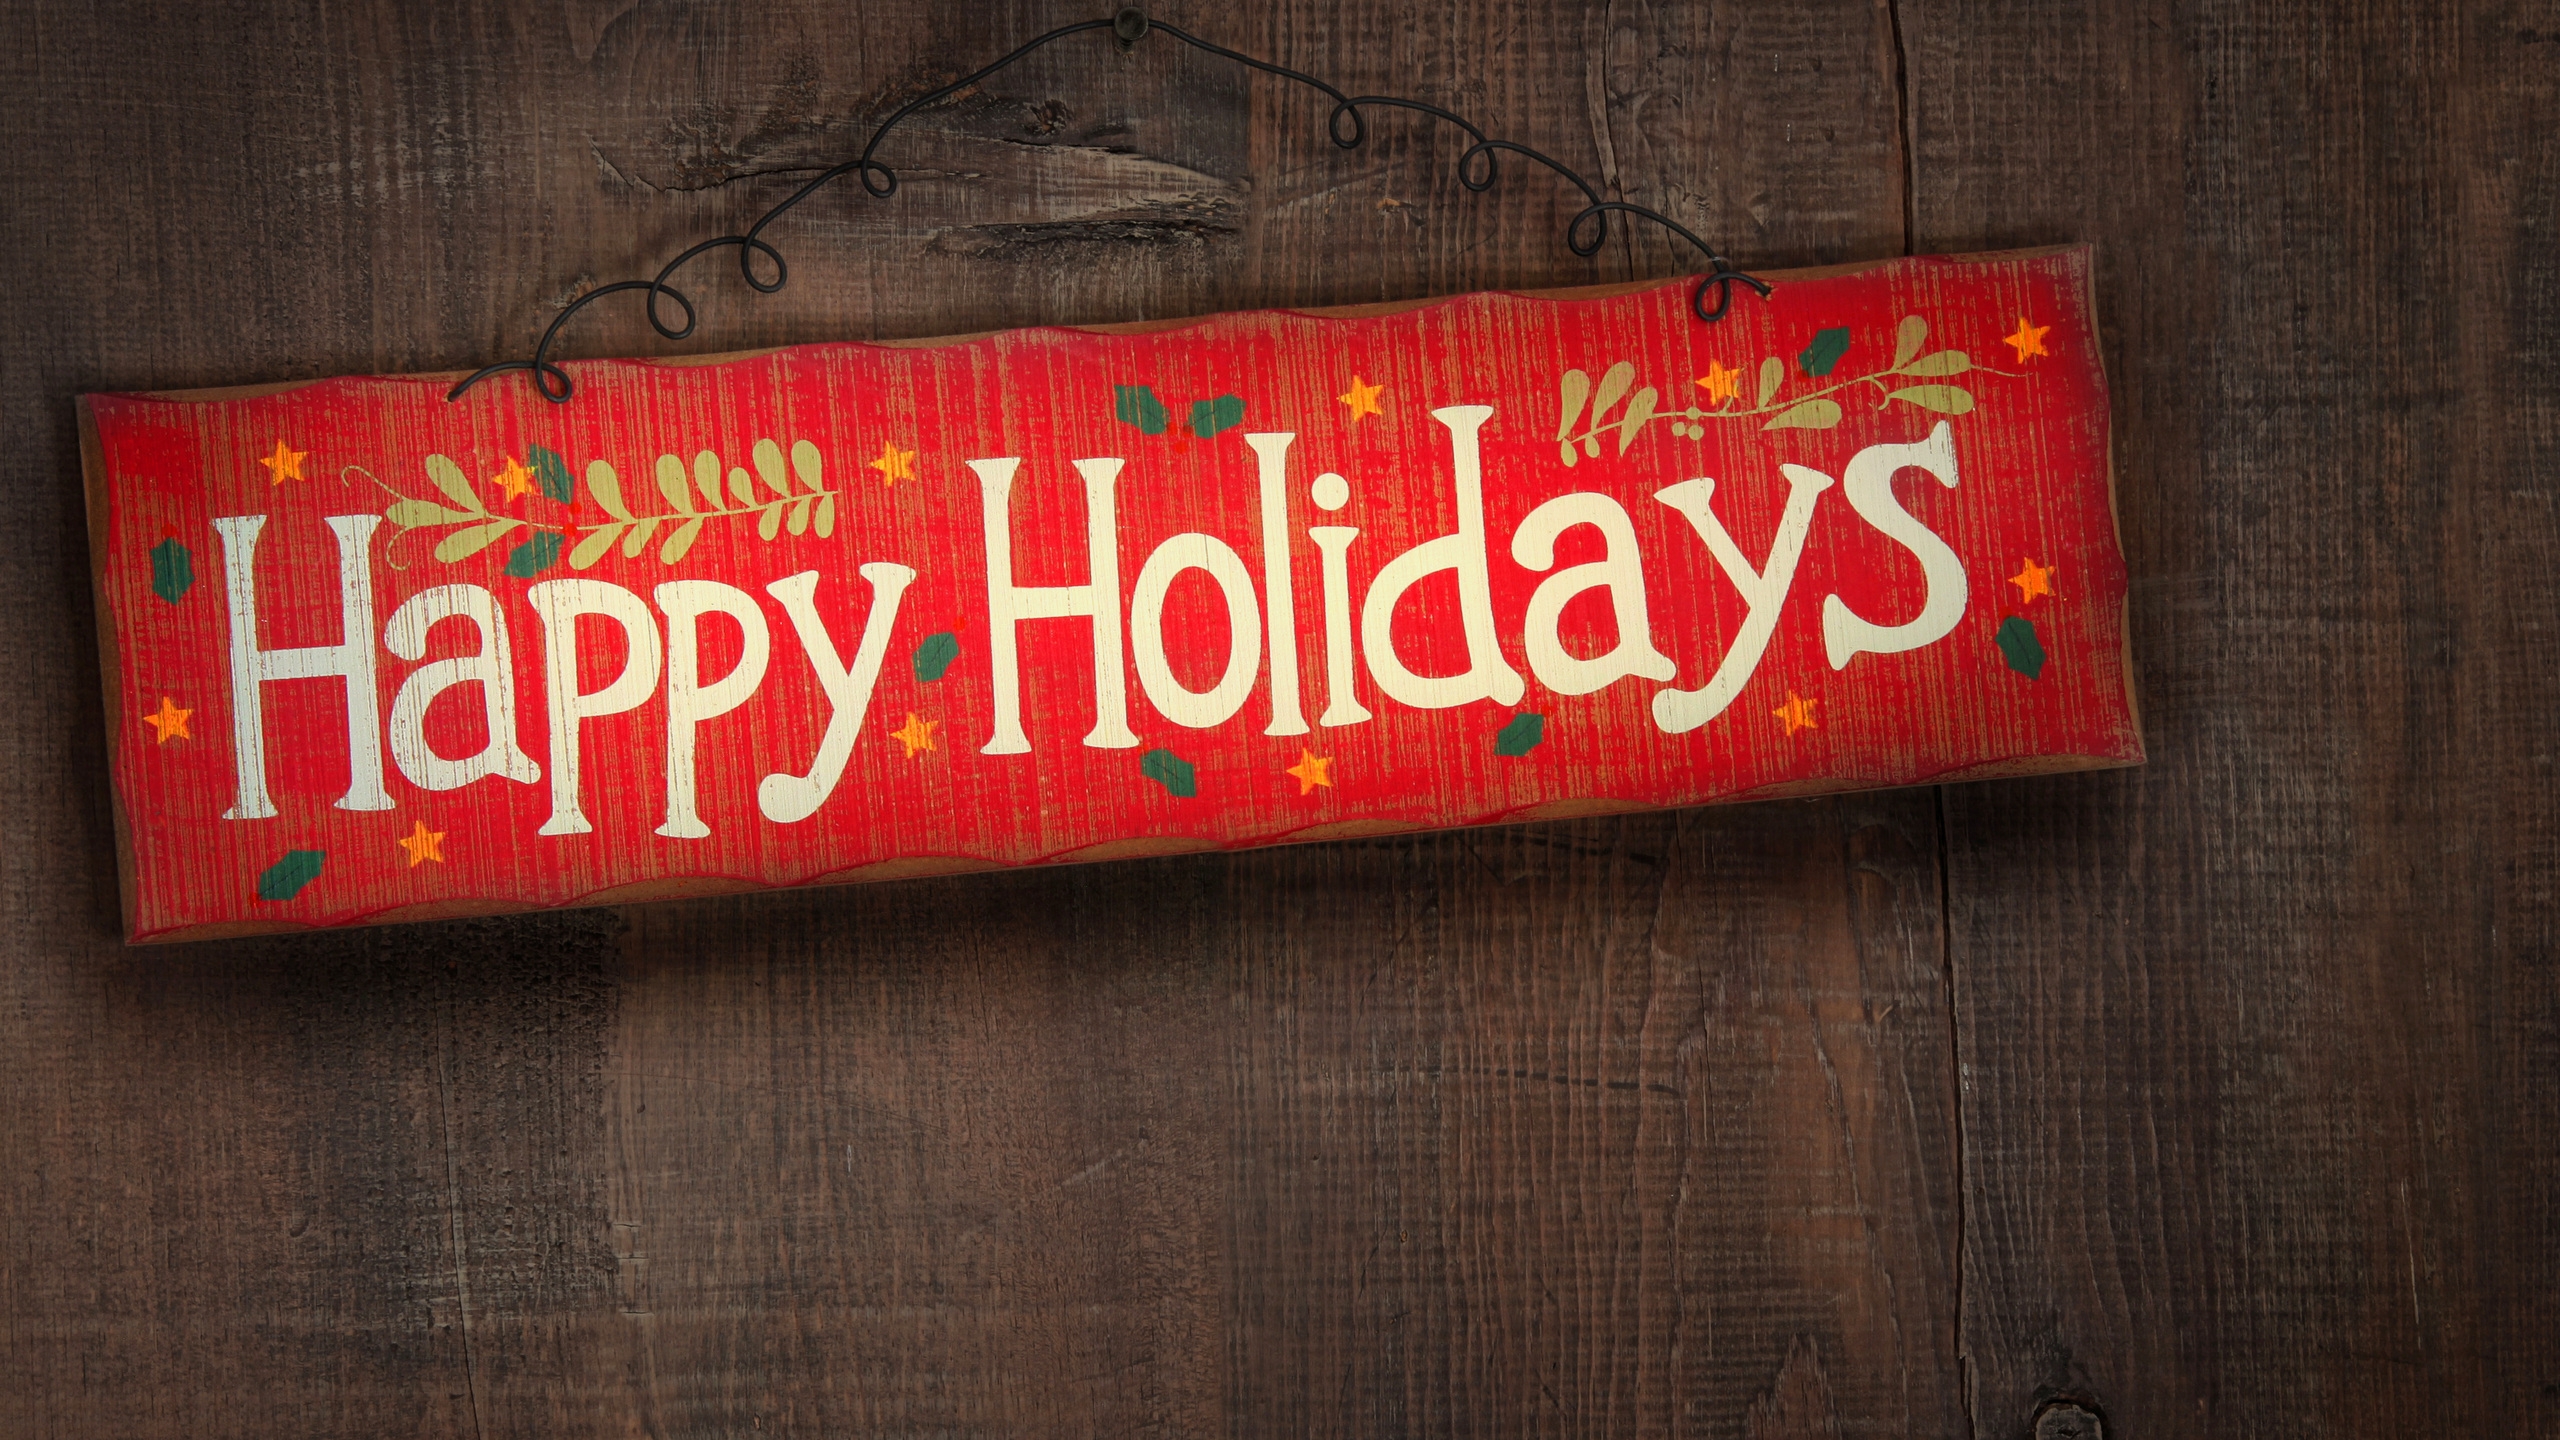 Happy Holidays for 2560x1440 HDTV resolution